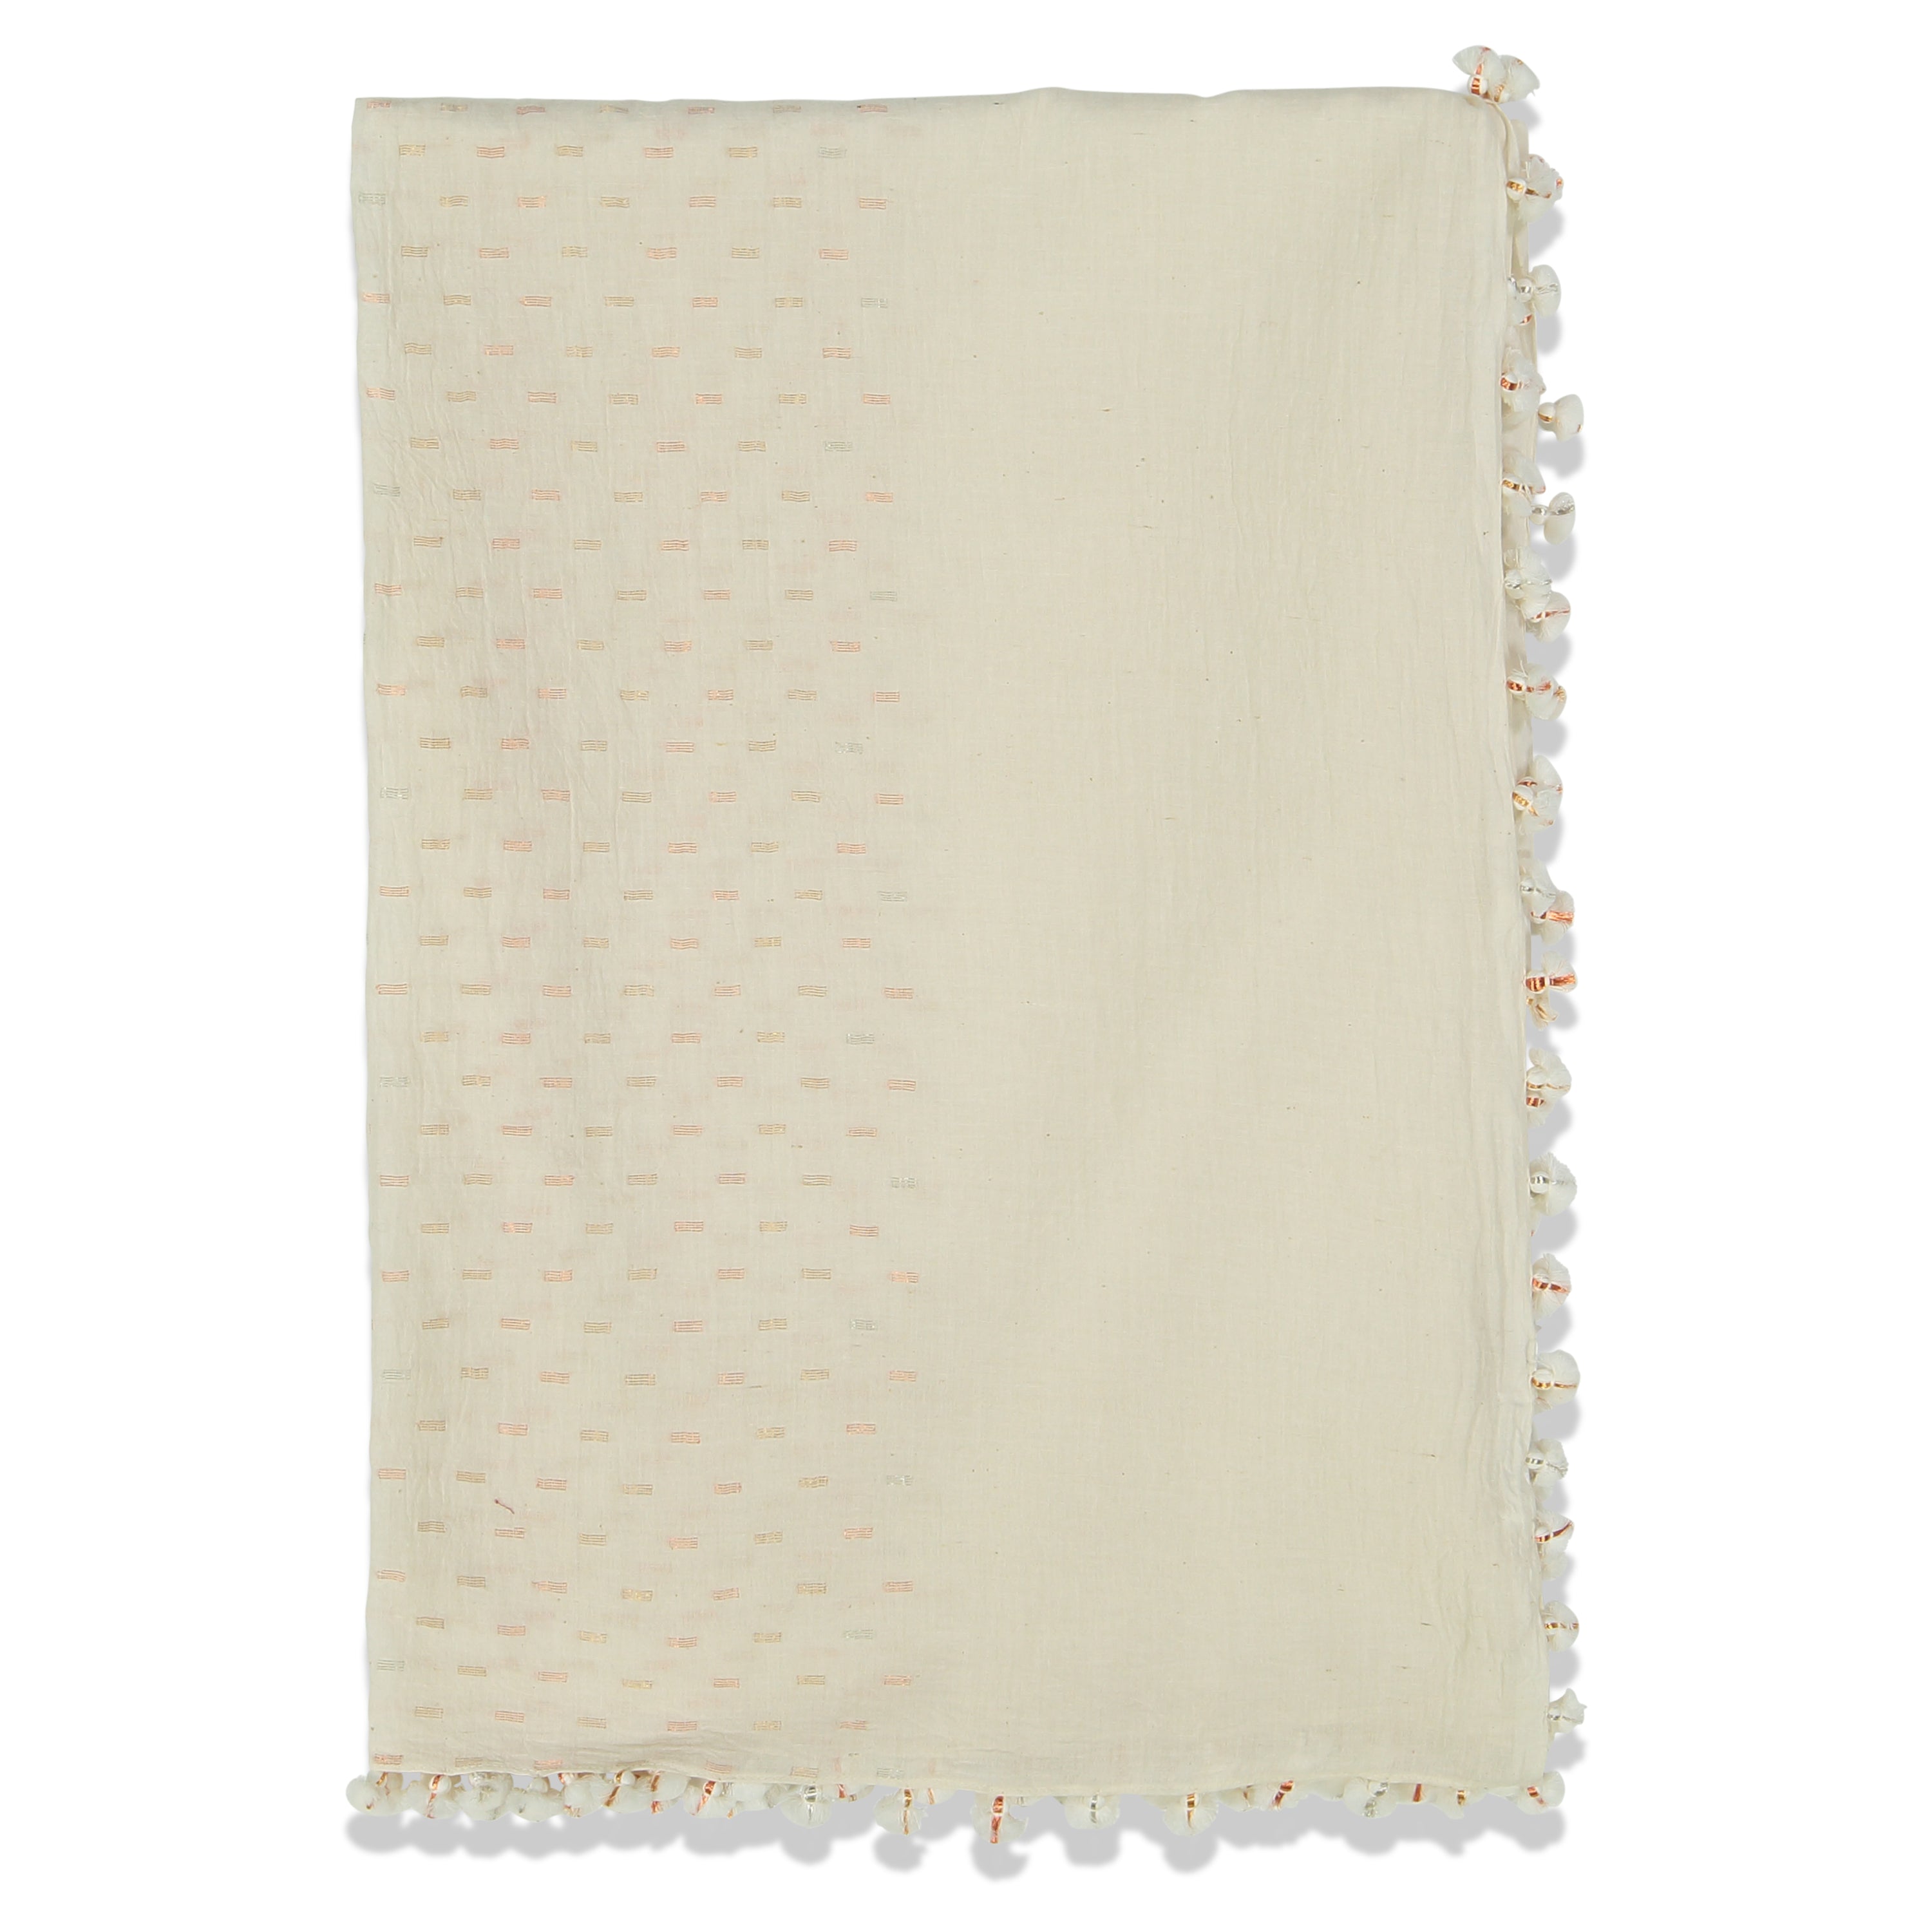 DROPS PAREO SHAWL WHITE GOLDS